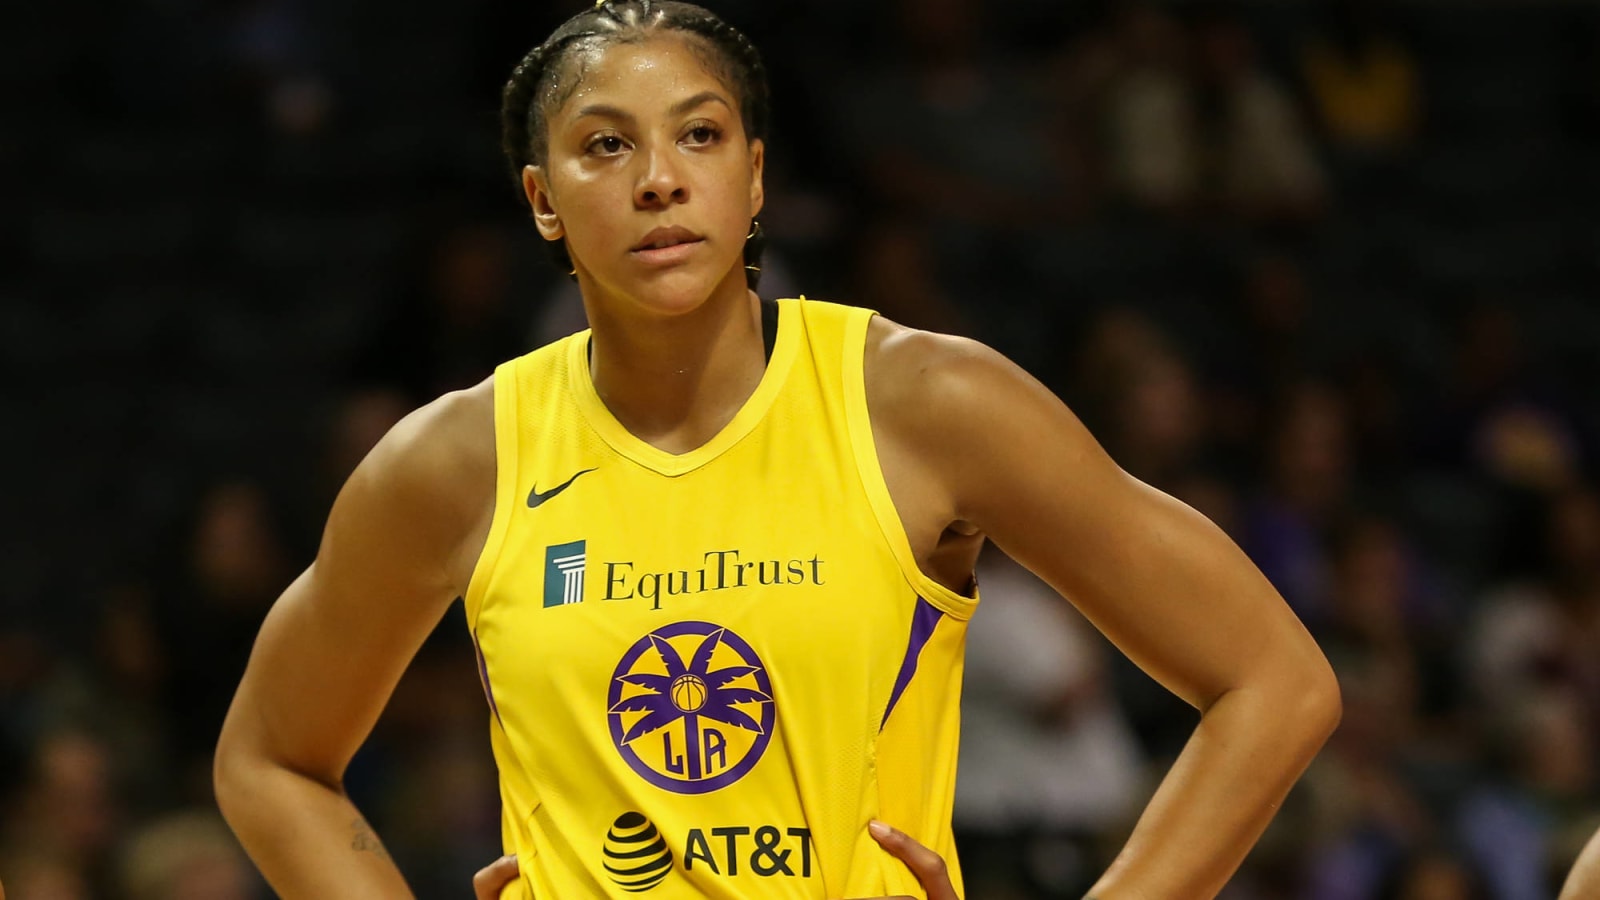 Dear WNBA, please put numbers on the front of the uniforms